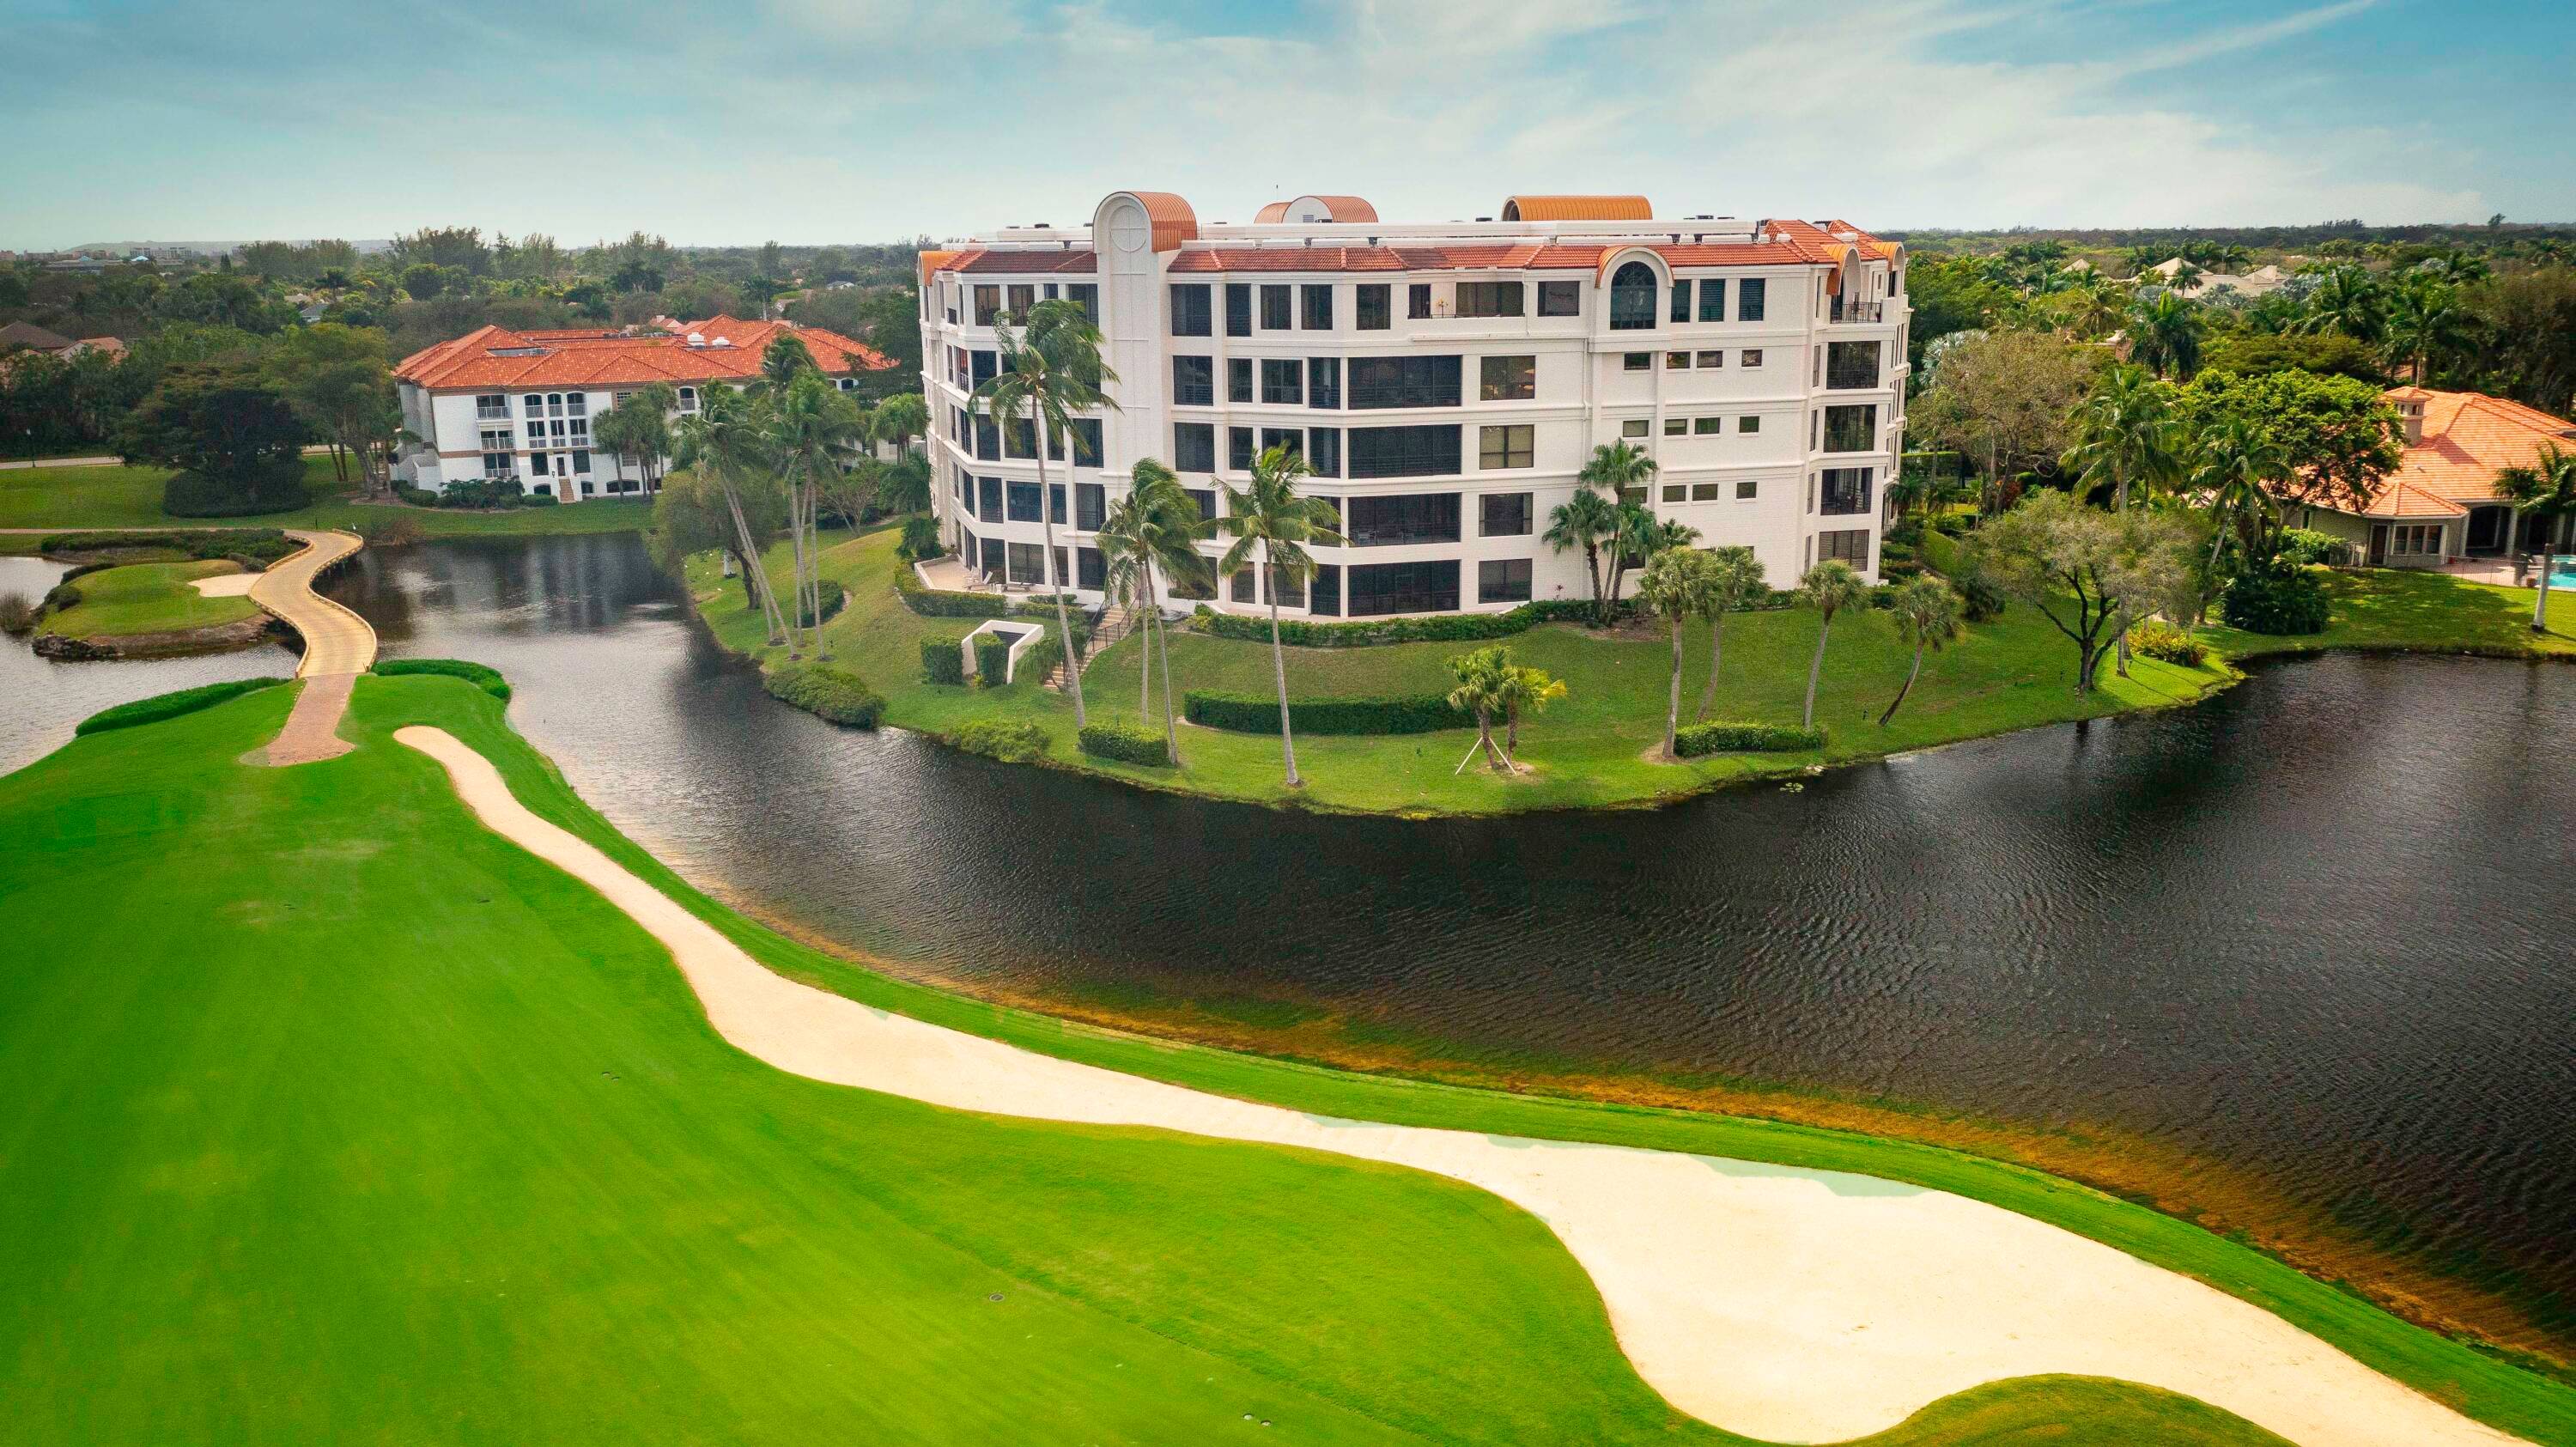 The Chateau in Boca Grove is a luxurious condo living option located within a boutique country club community.